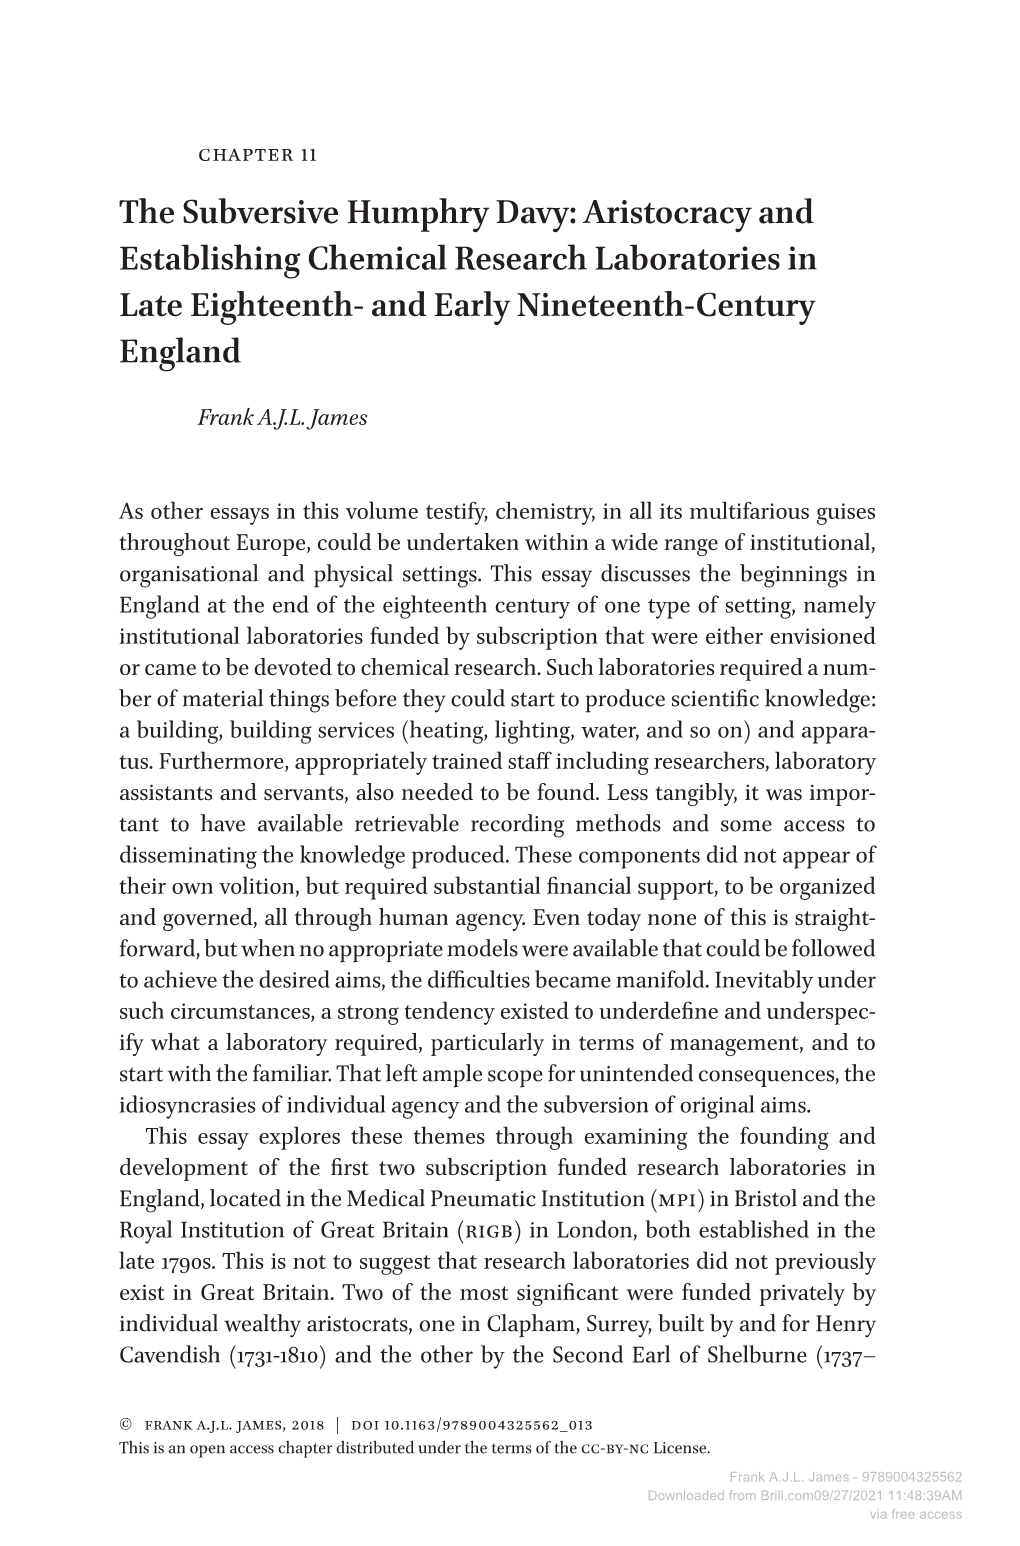 The Subversive Humphry Davy: Aristocracy and Establishing Chemical Research Laboratories in Late Eighteenth- and Early Nineteenth-Century England